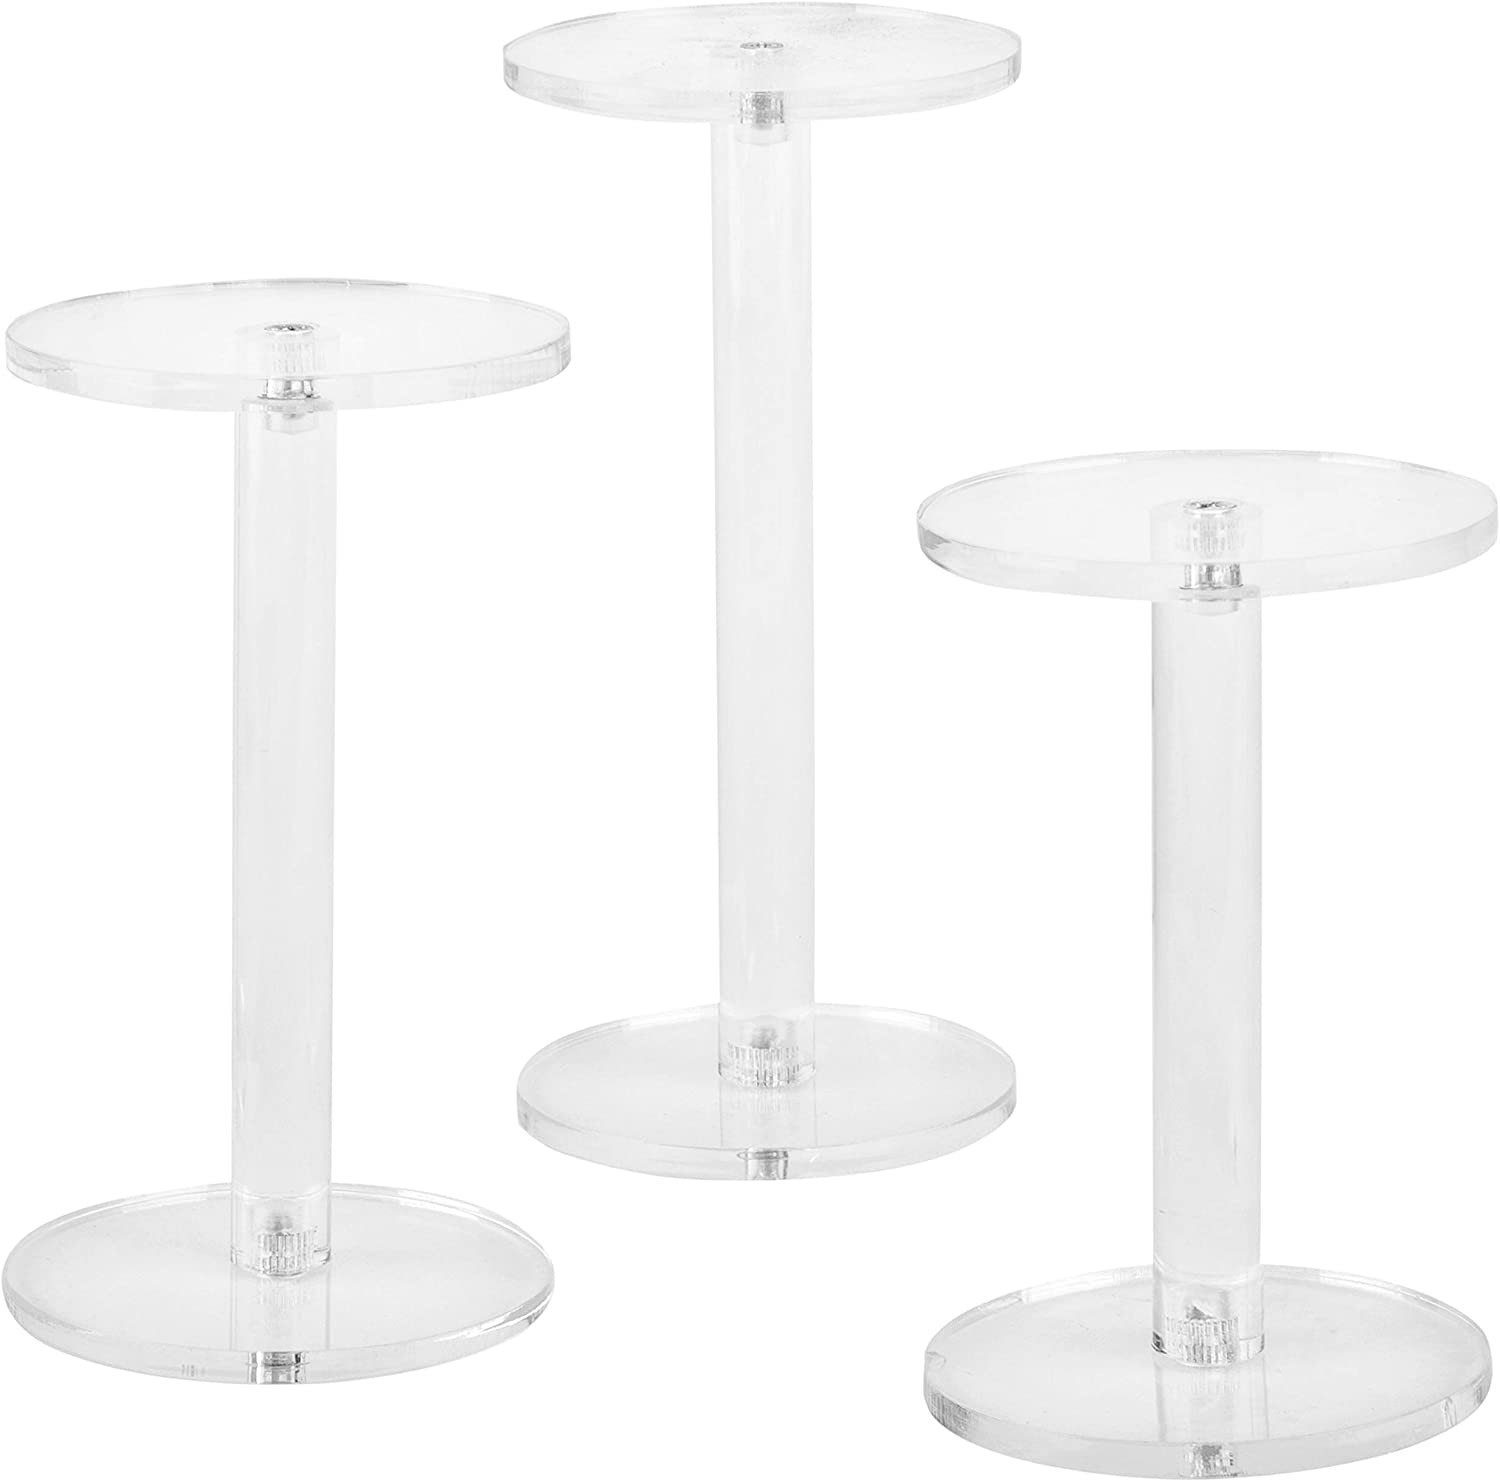 China acrylic jewelry display Set of 3 Round Watch Pedestal Riser Stands holder 4.8/5.4/ 6.5inch factory